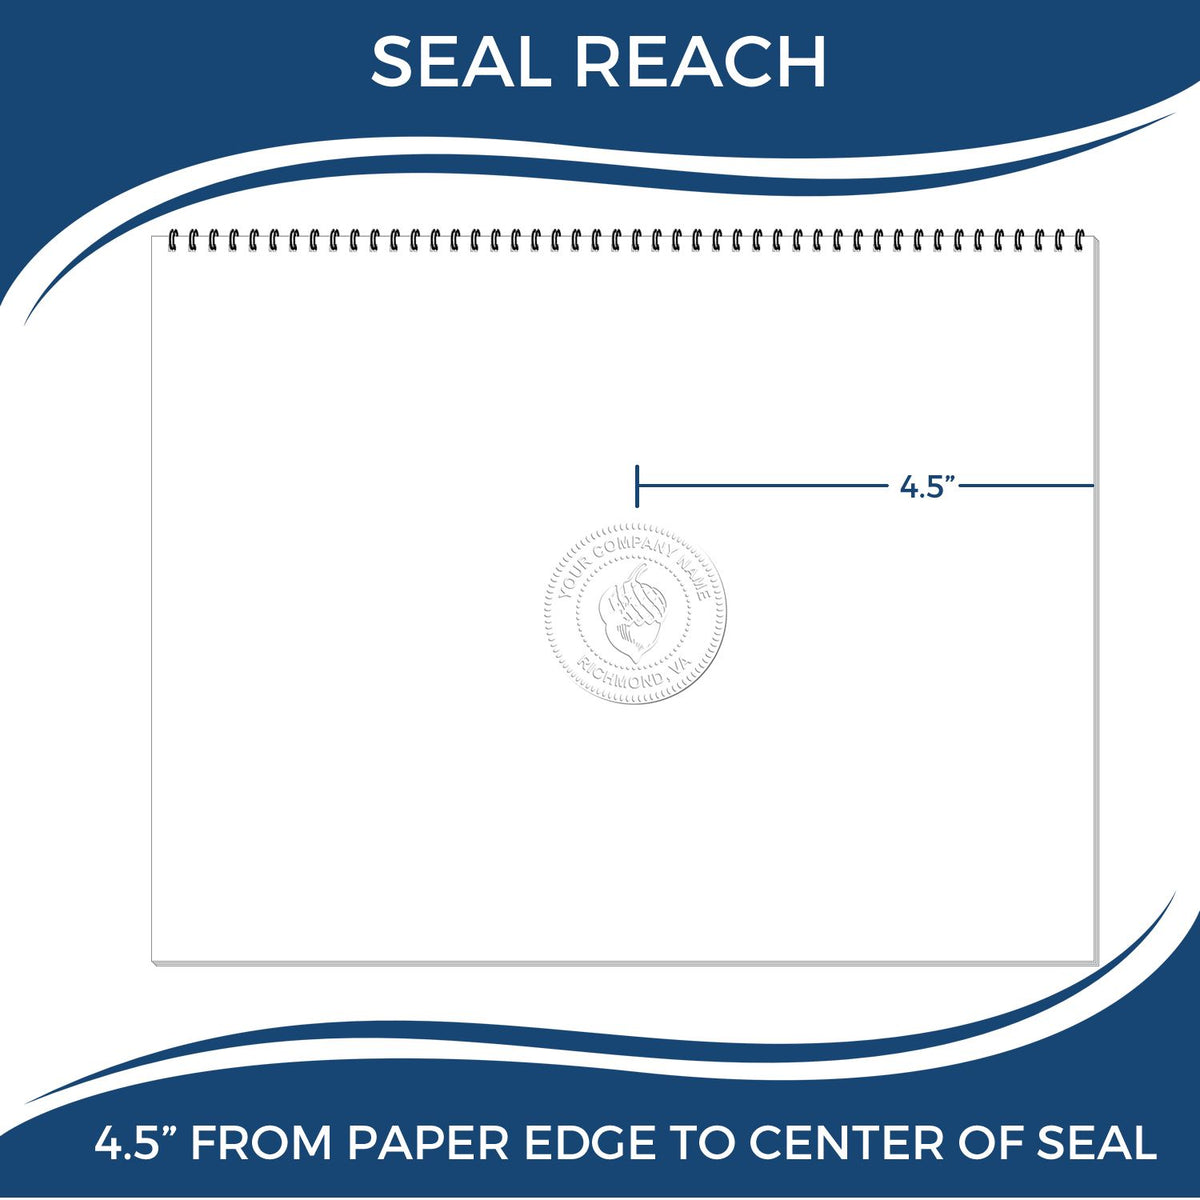 An infographic showing the seal reach which is represented by a ruler and a miniature seal image of the State of North Carolina Extended Long Reach Geologist Seal